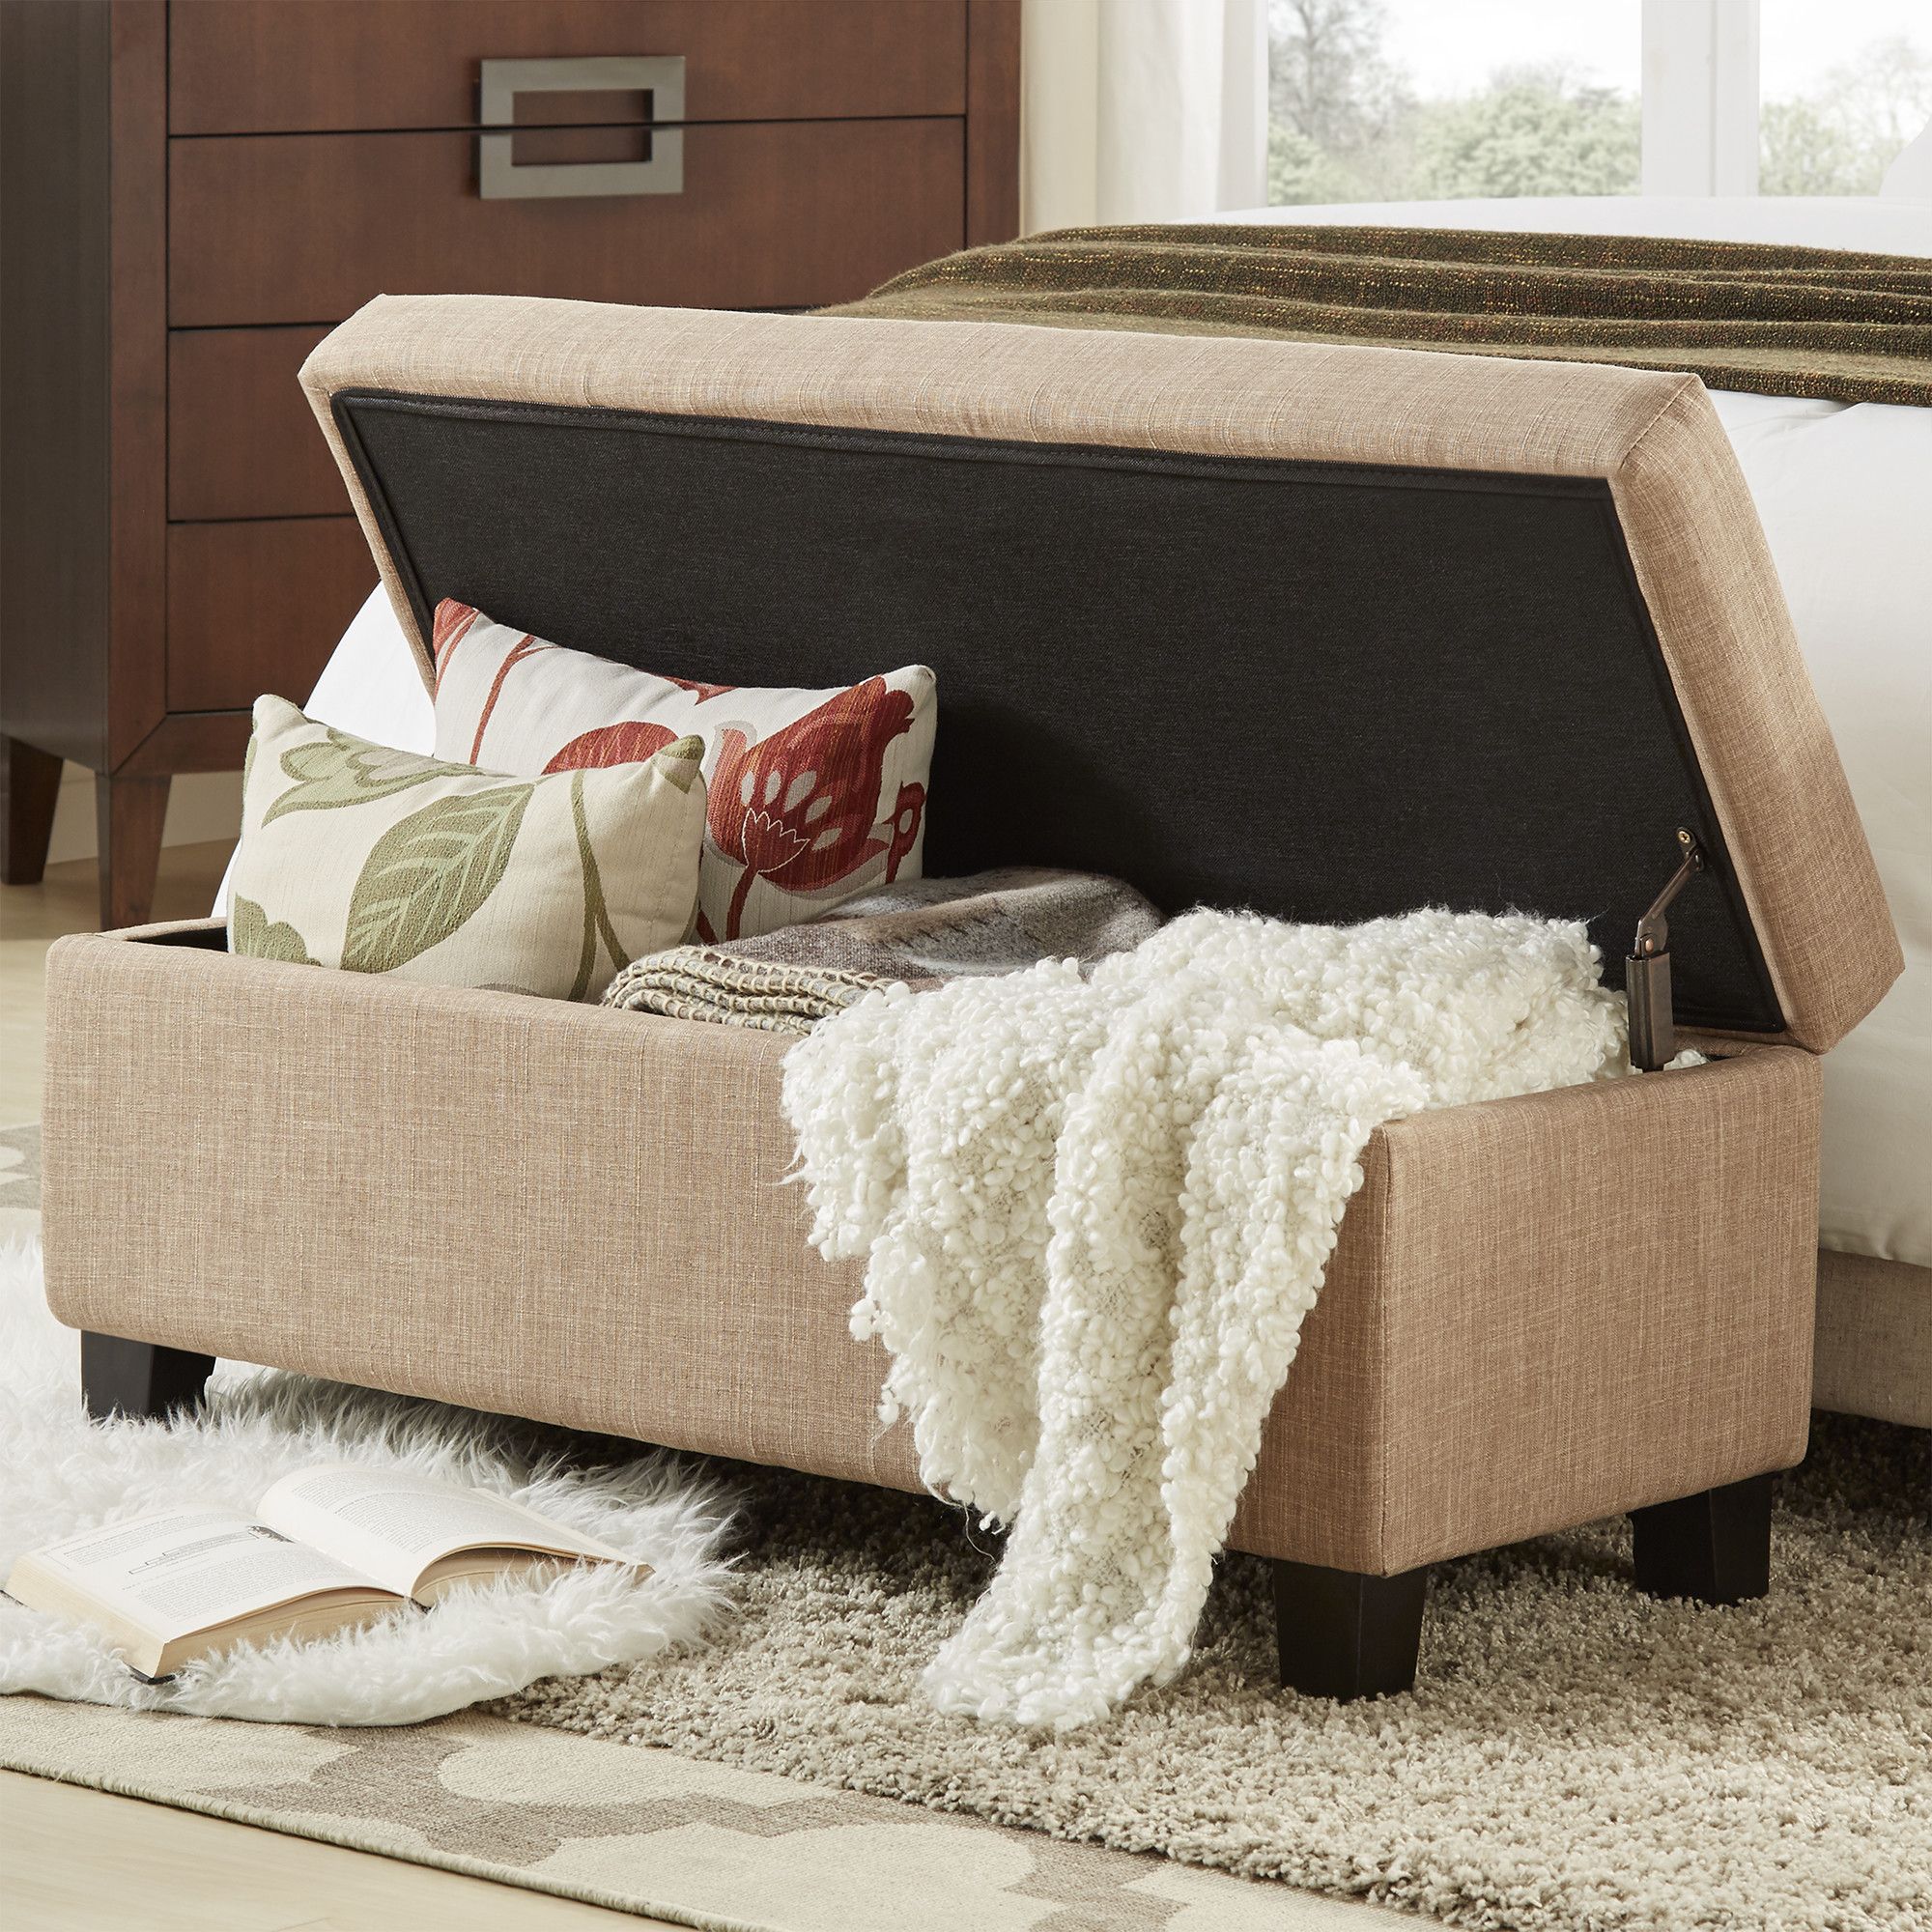 Bedroom Storage Bench: How To Choose The Perfect One For Your Home